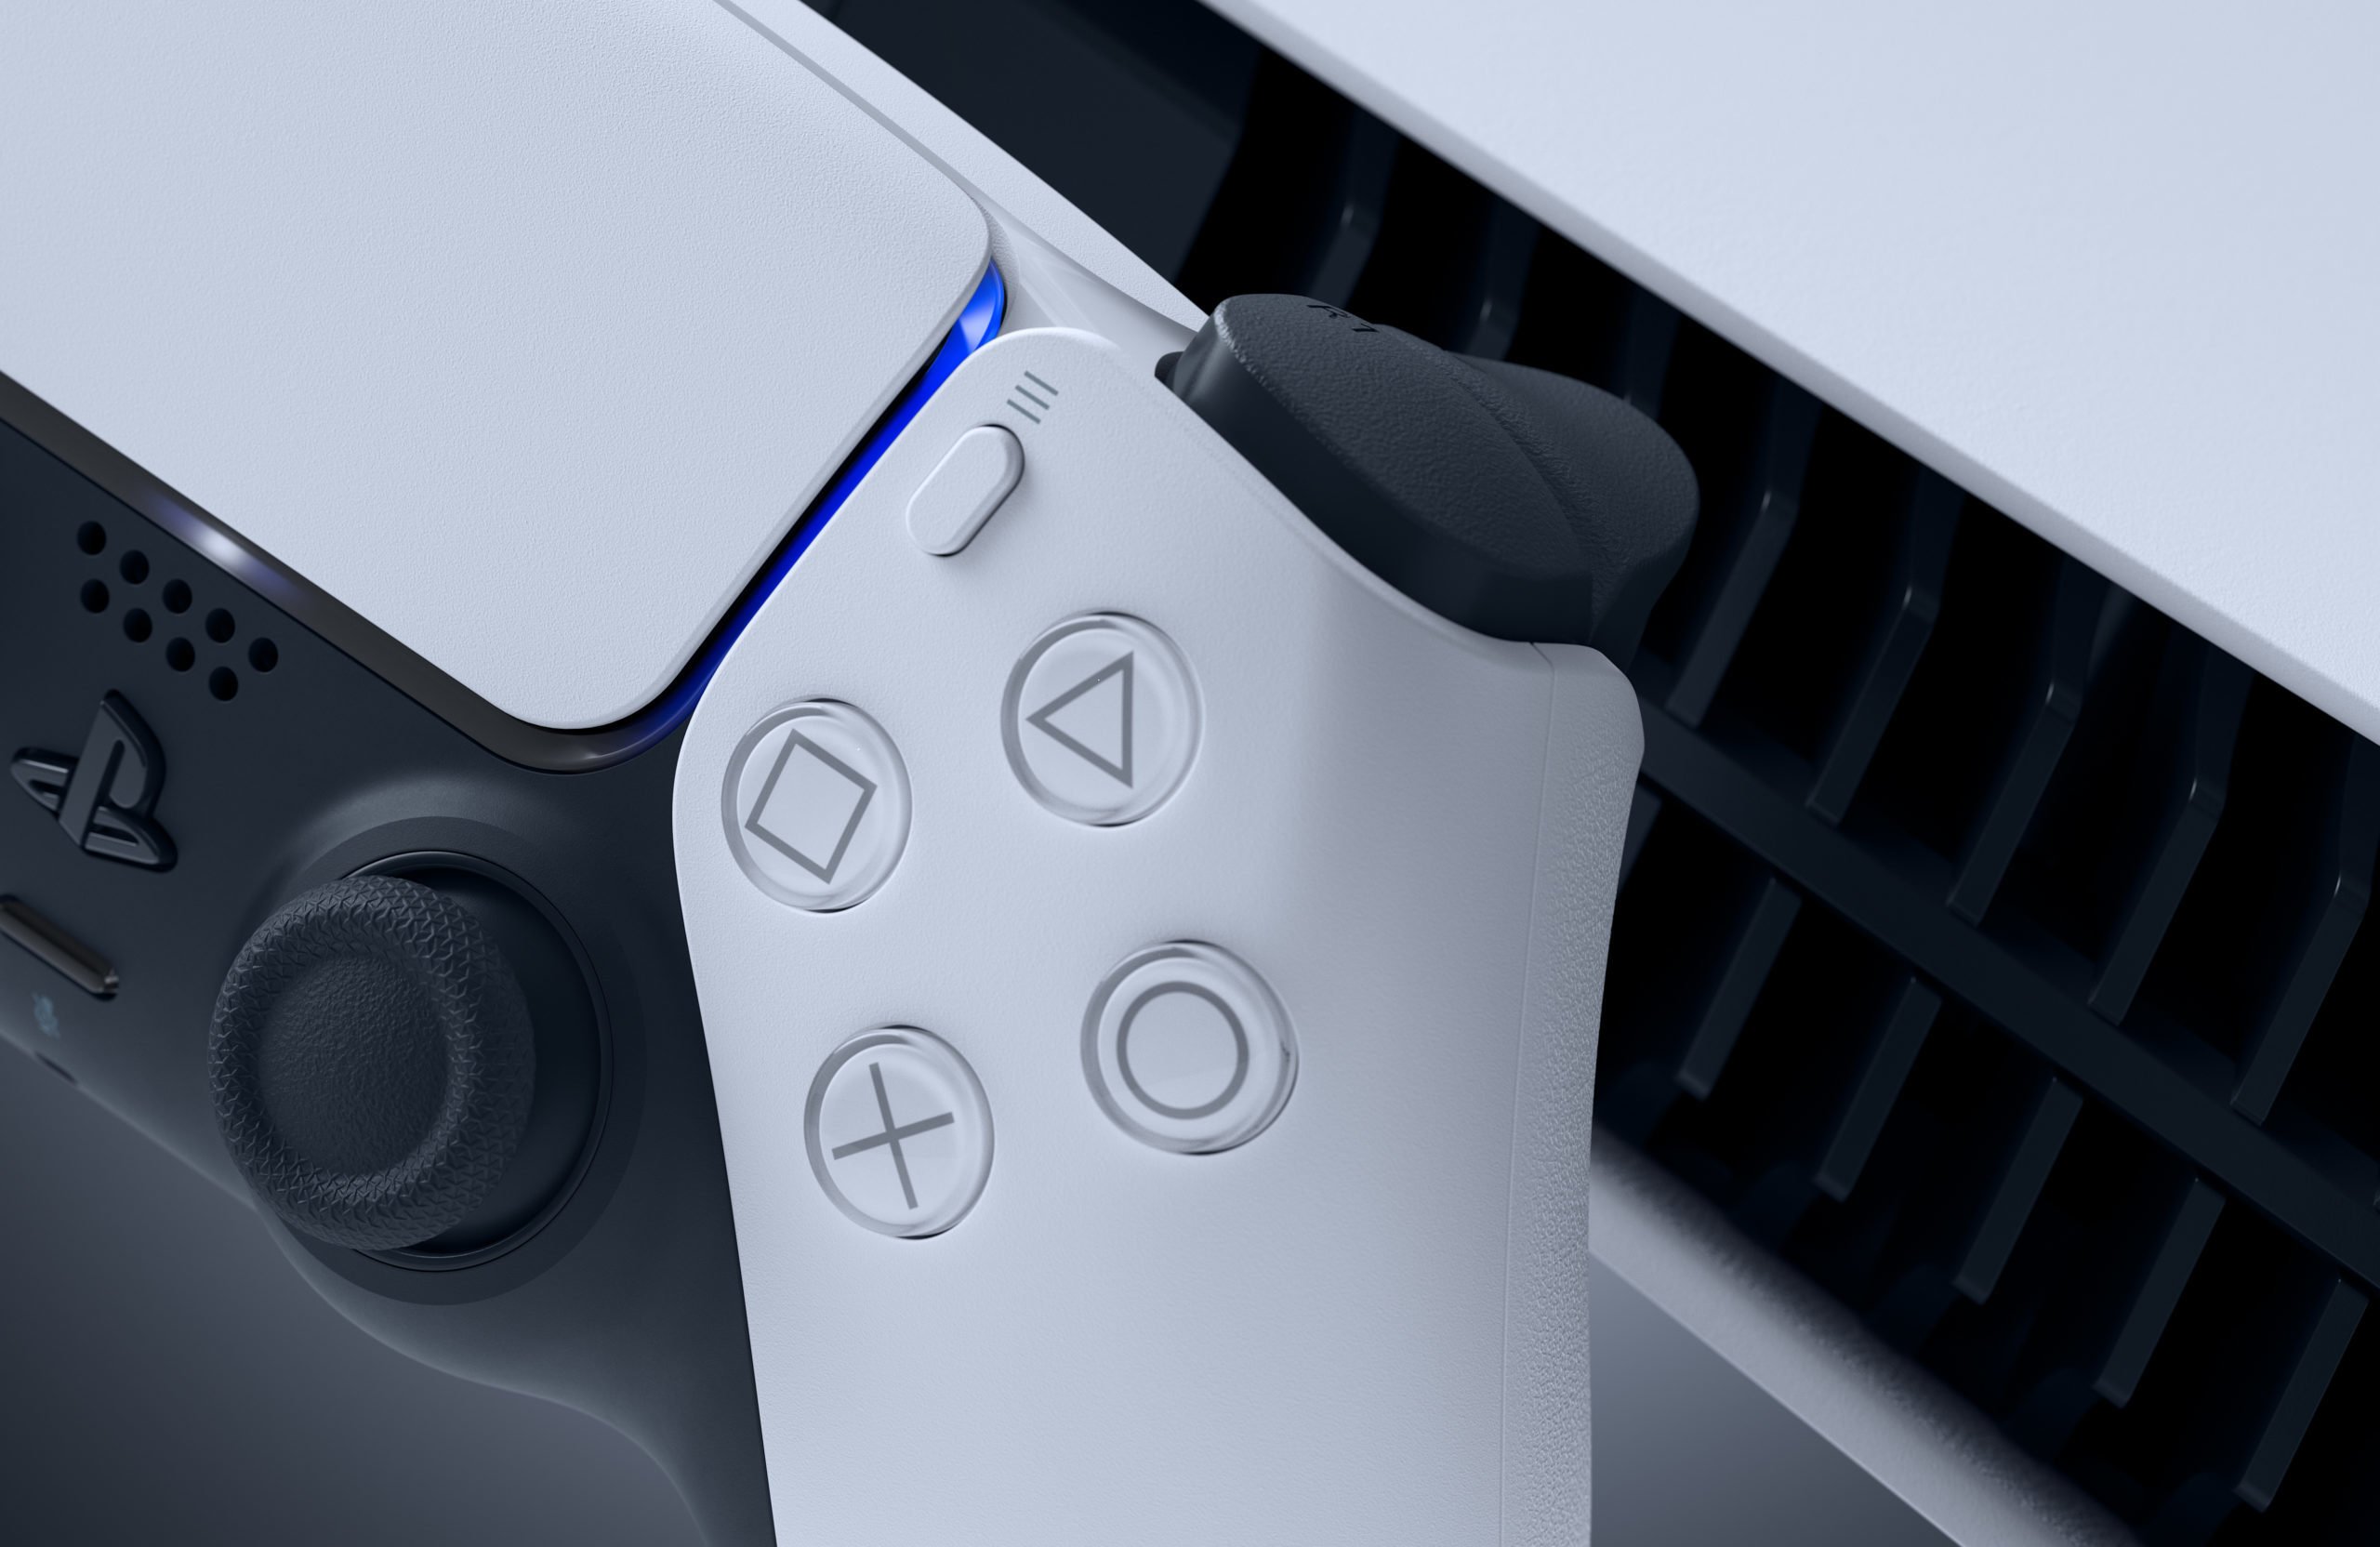 Sony expands accessibility options with PS5, including ability to 